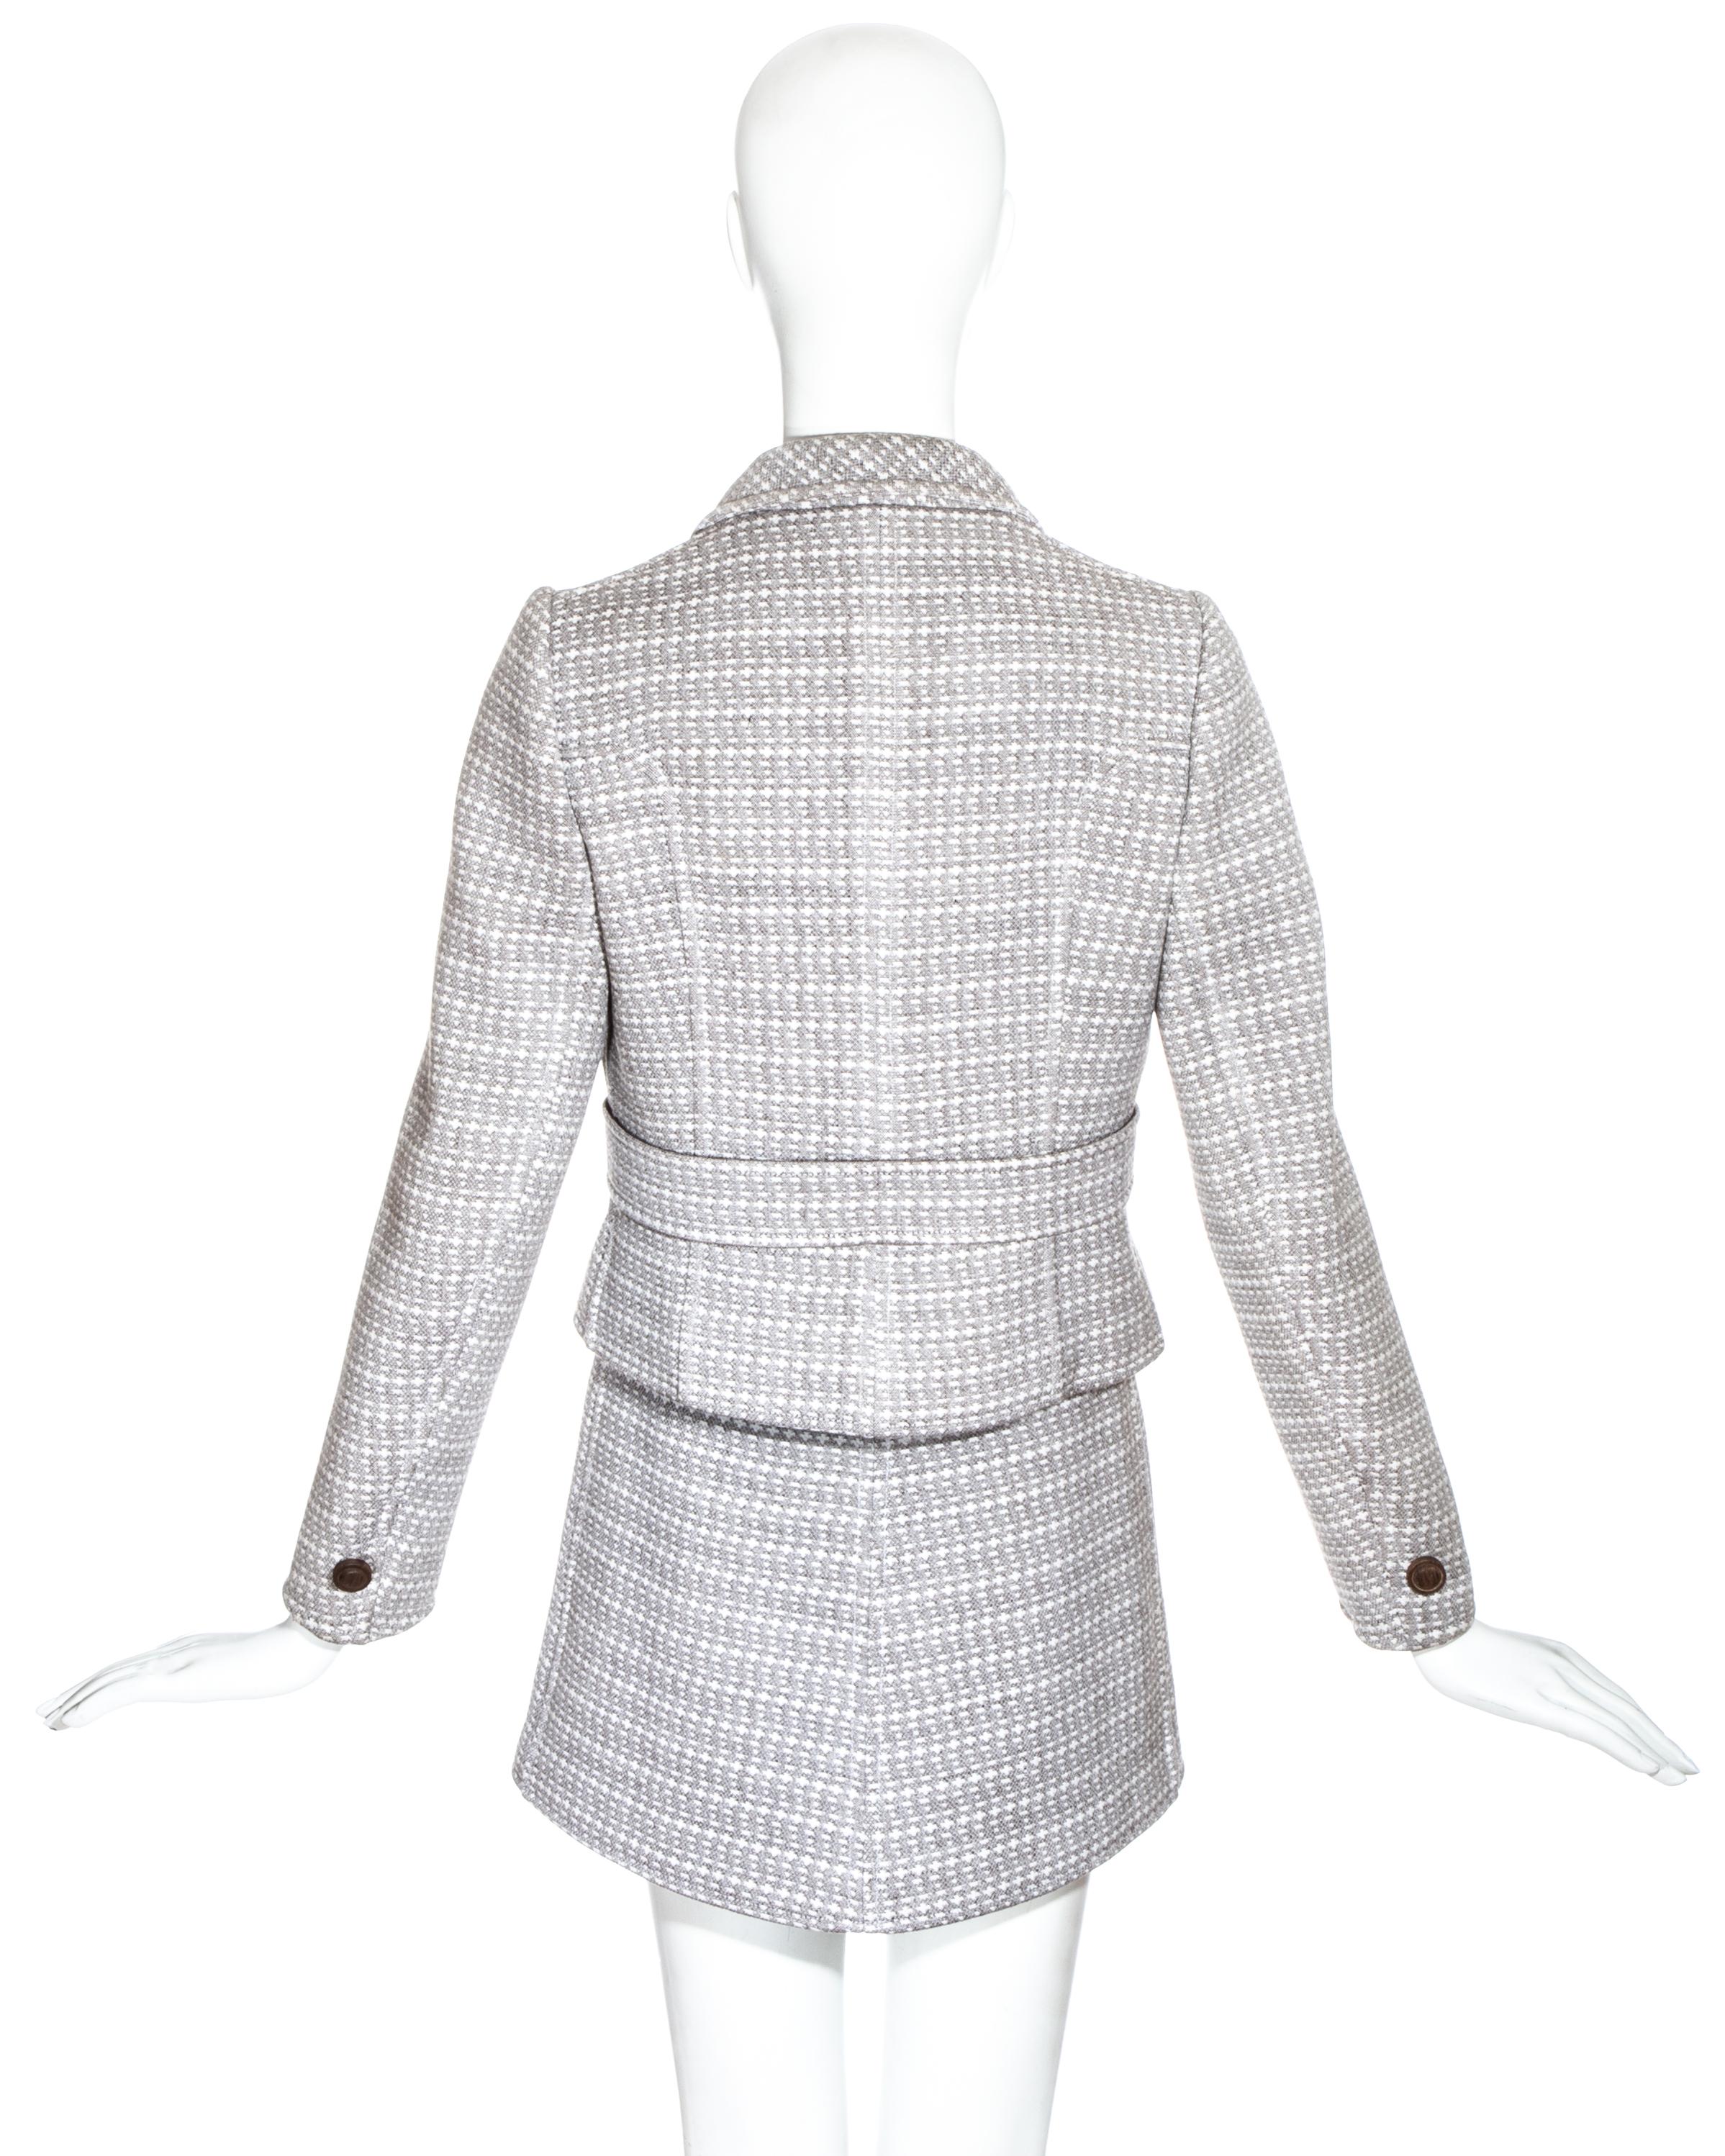 Women's Courreges couture brown wool mini skirt suit, c. 1969 For Sale